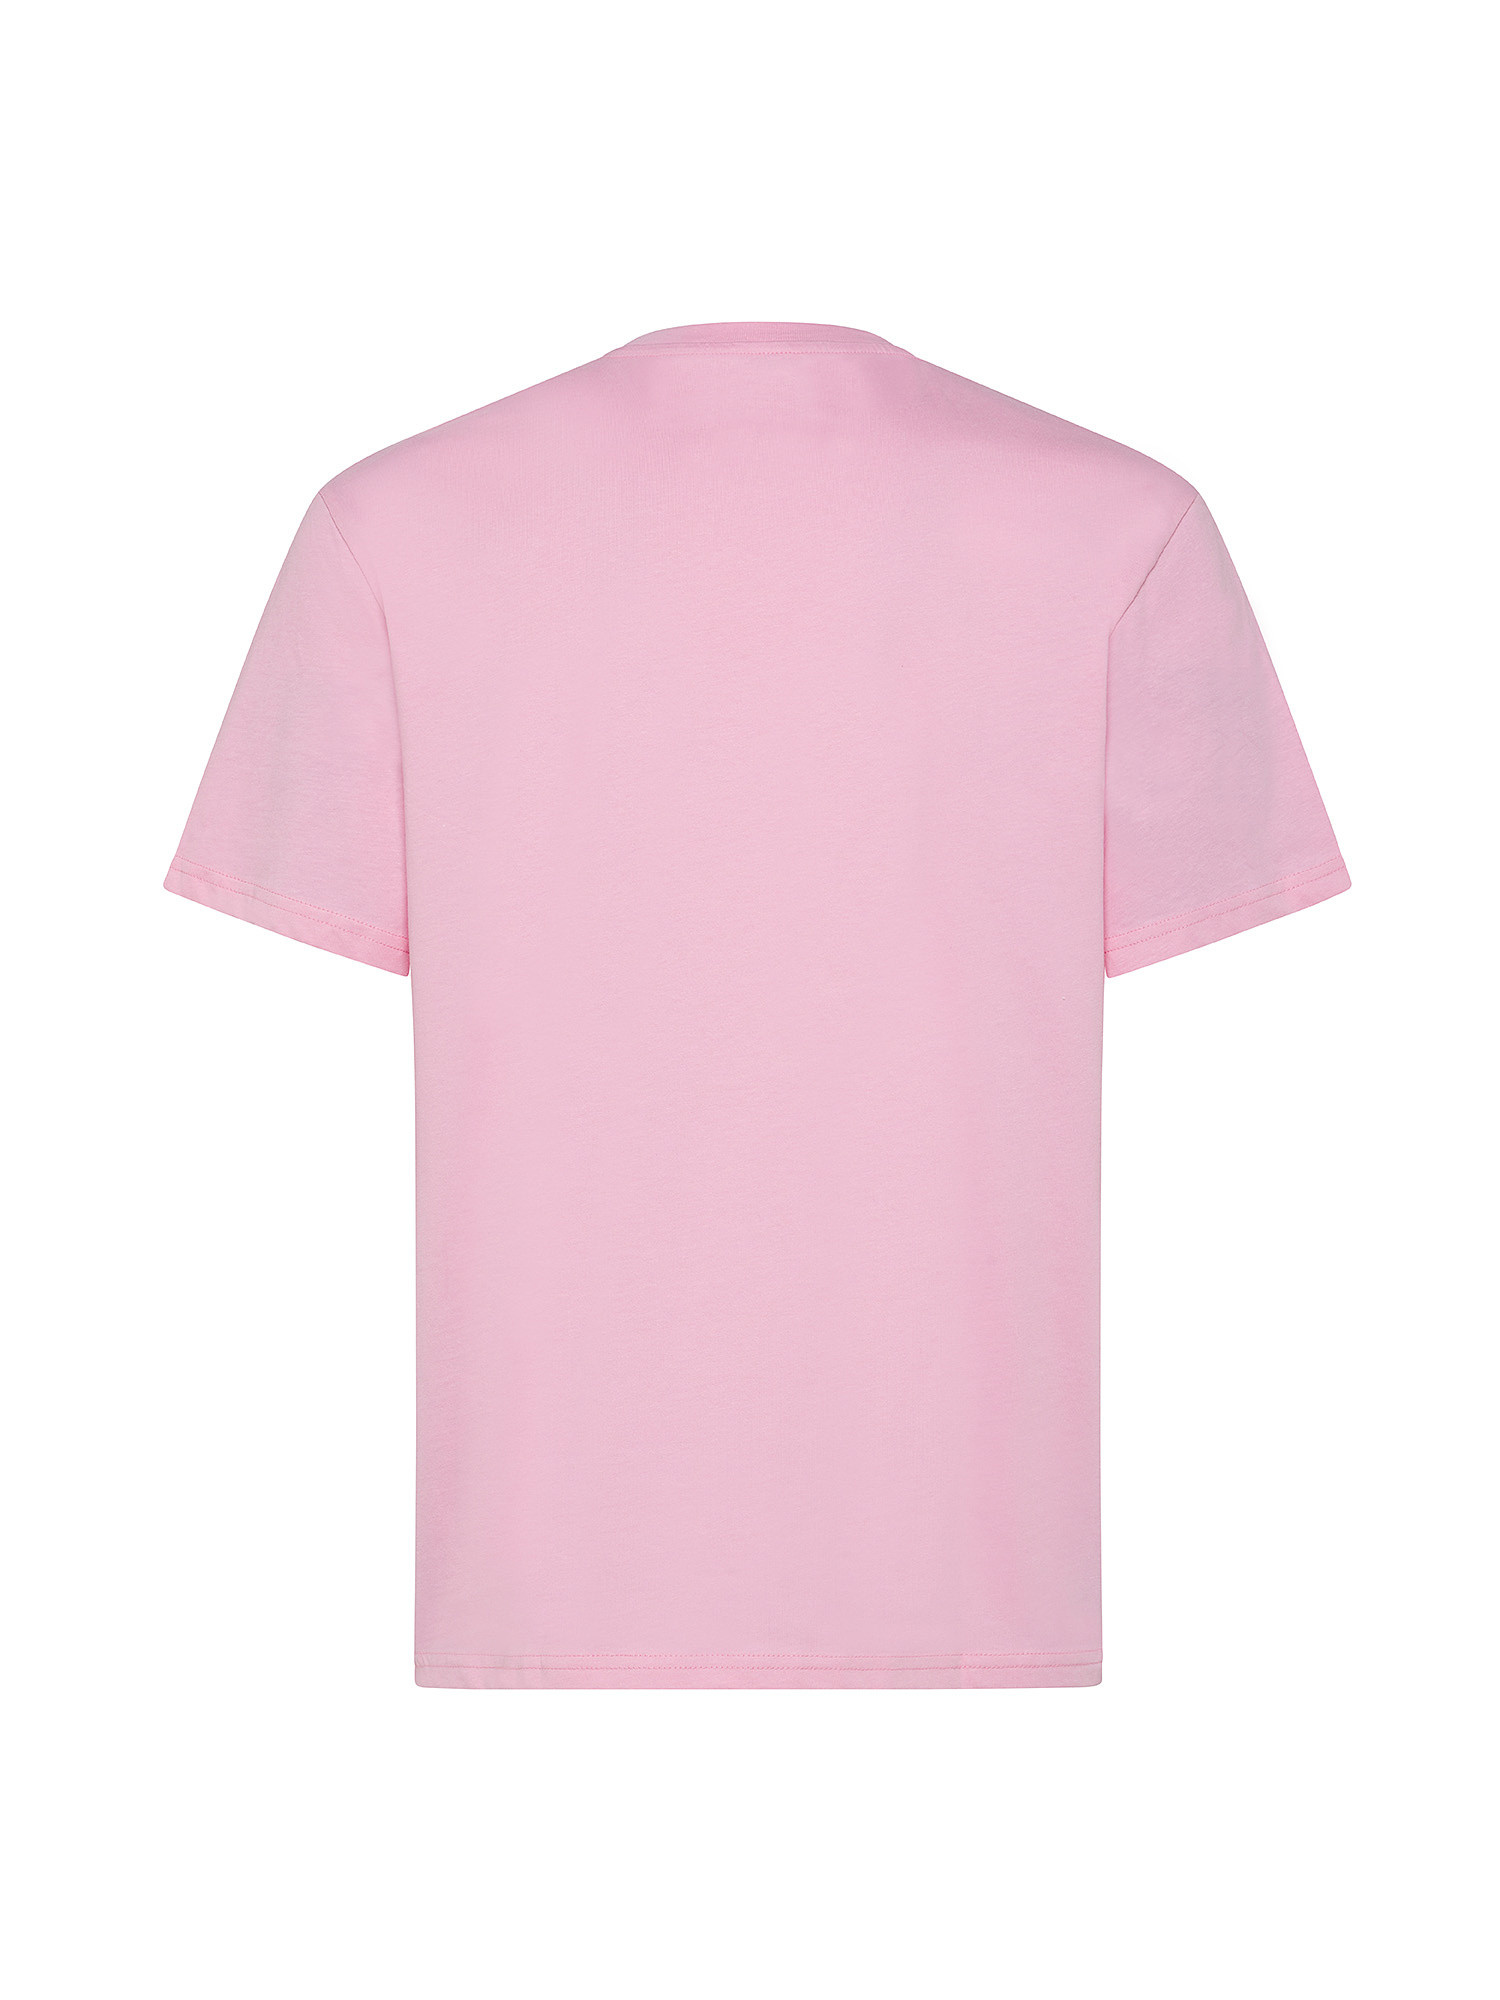 Jack & Jones - T-shirt relaxed fit con stampa, Rosa, large image number 1